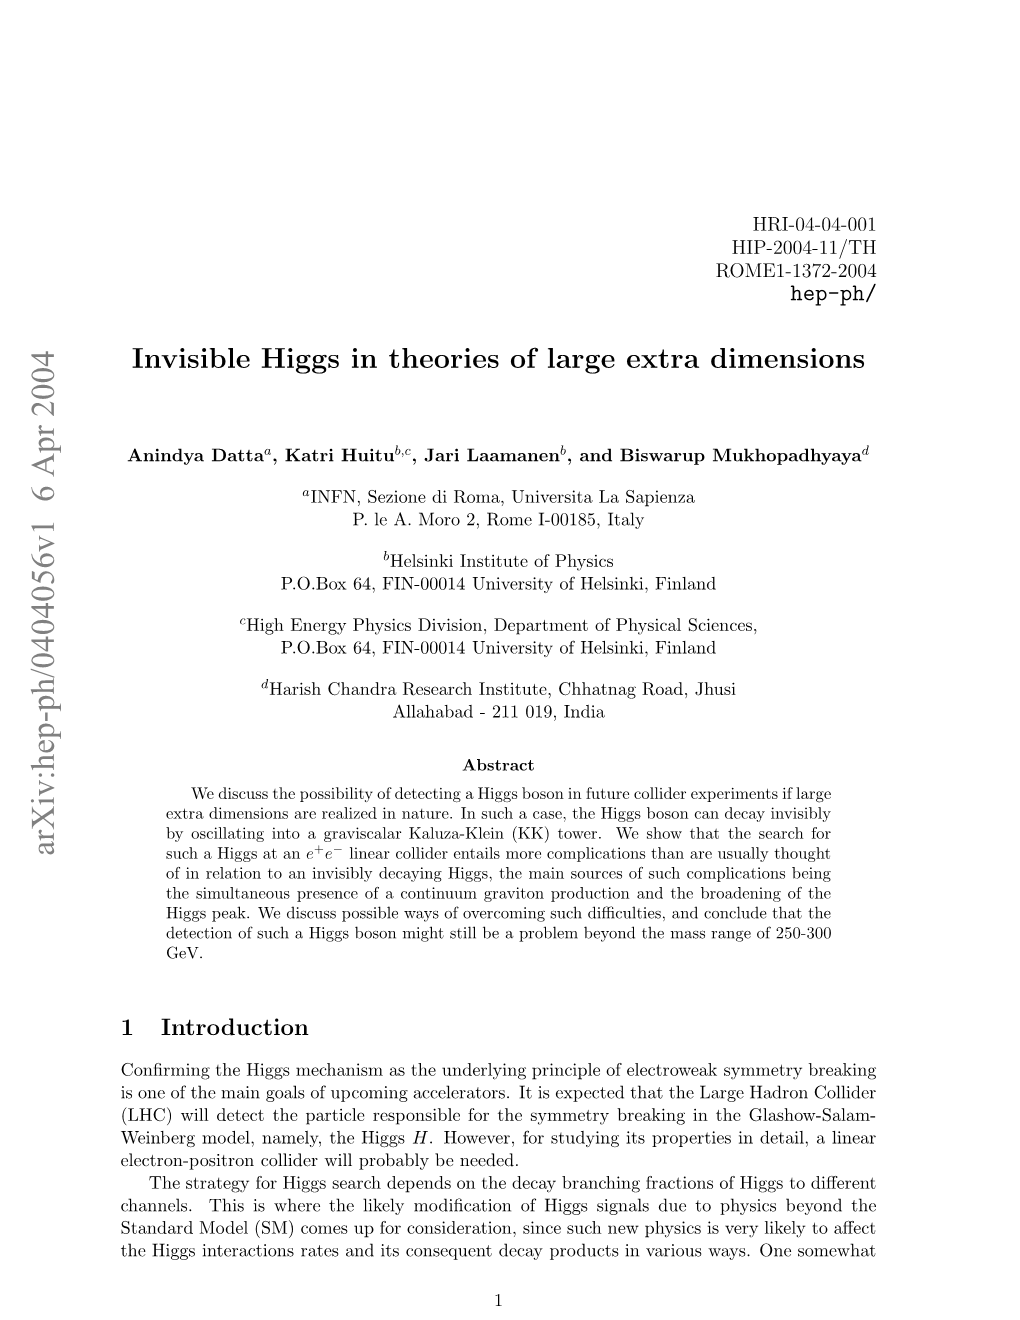 Invisible Higgs in Theories of Large Extra Dimensions